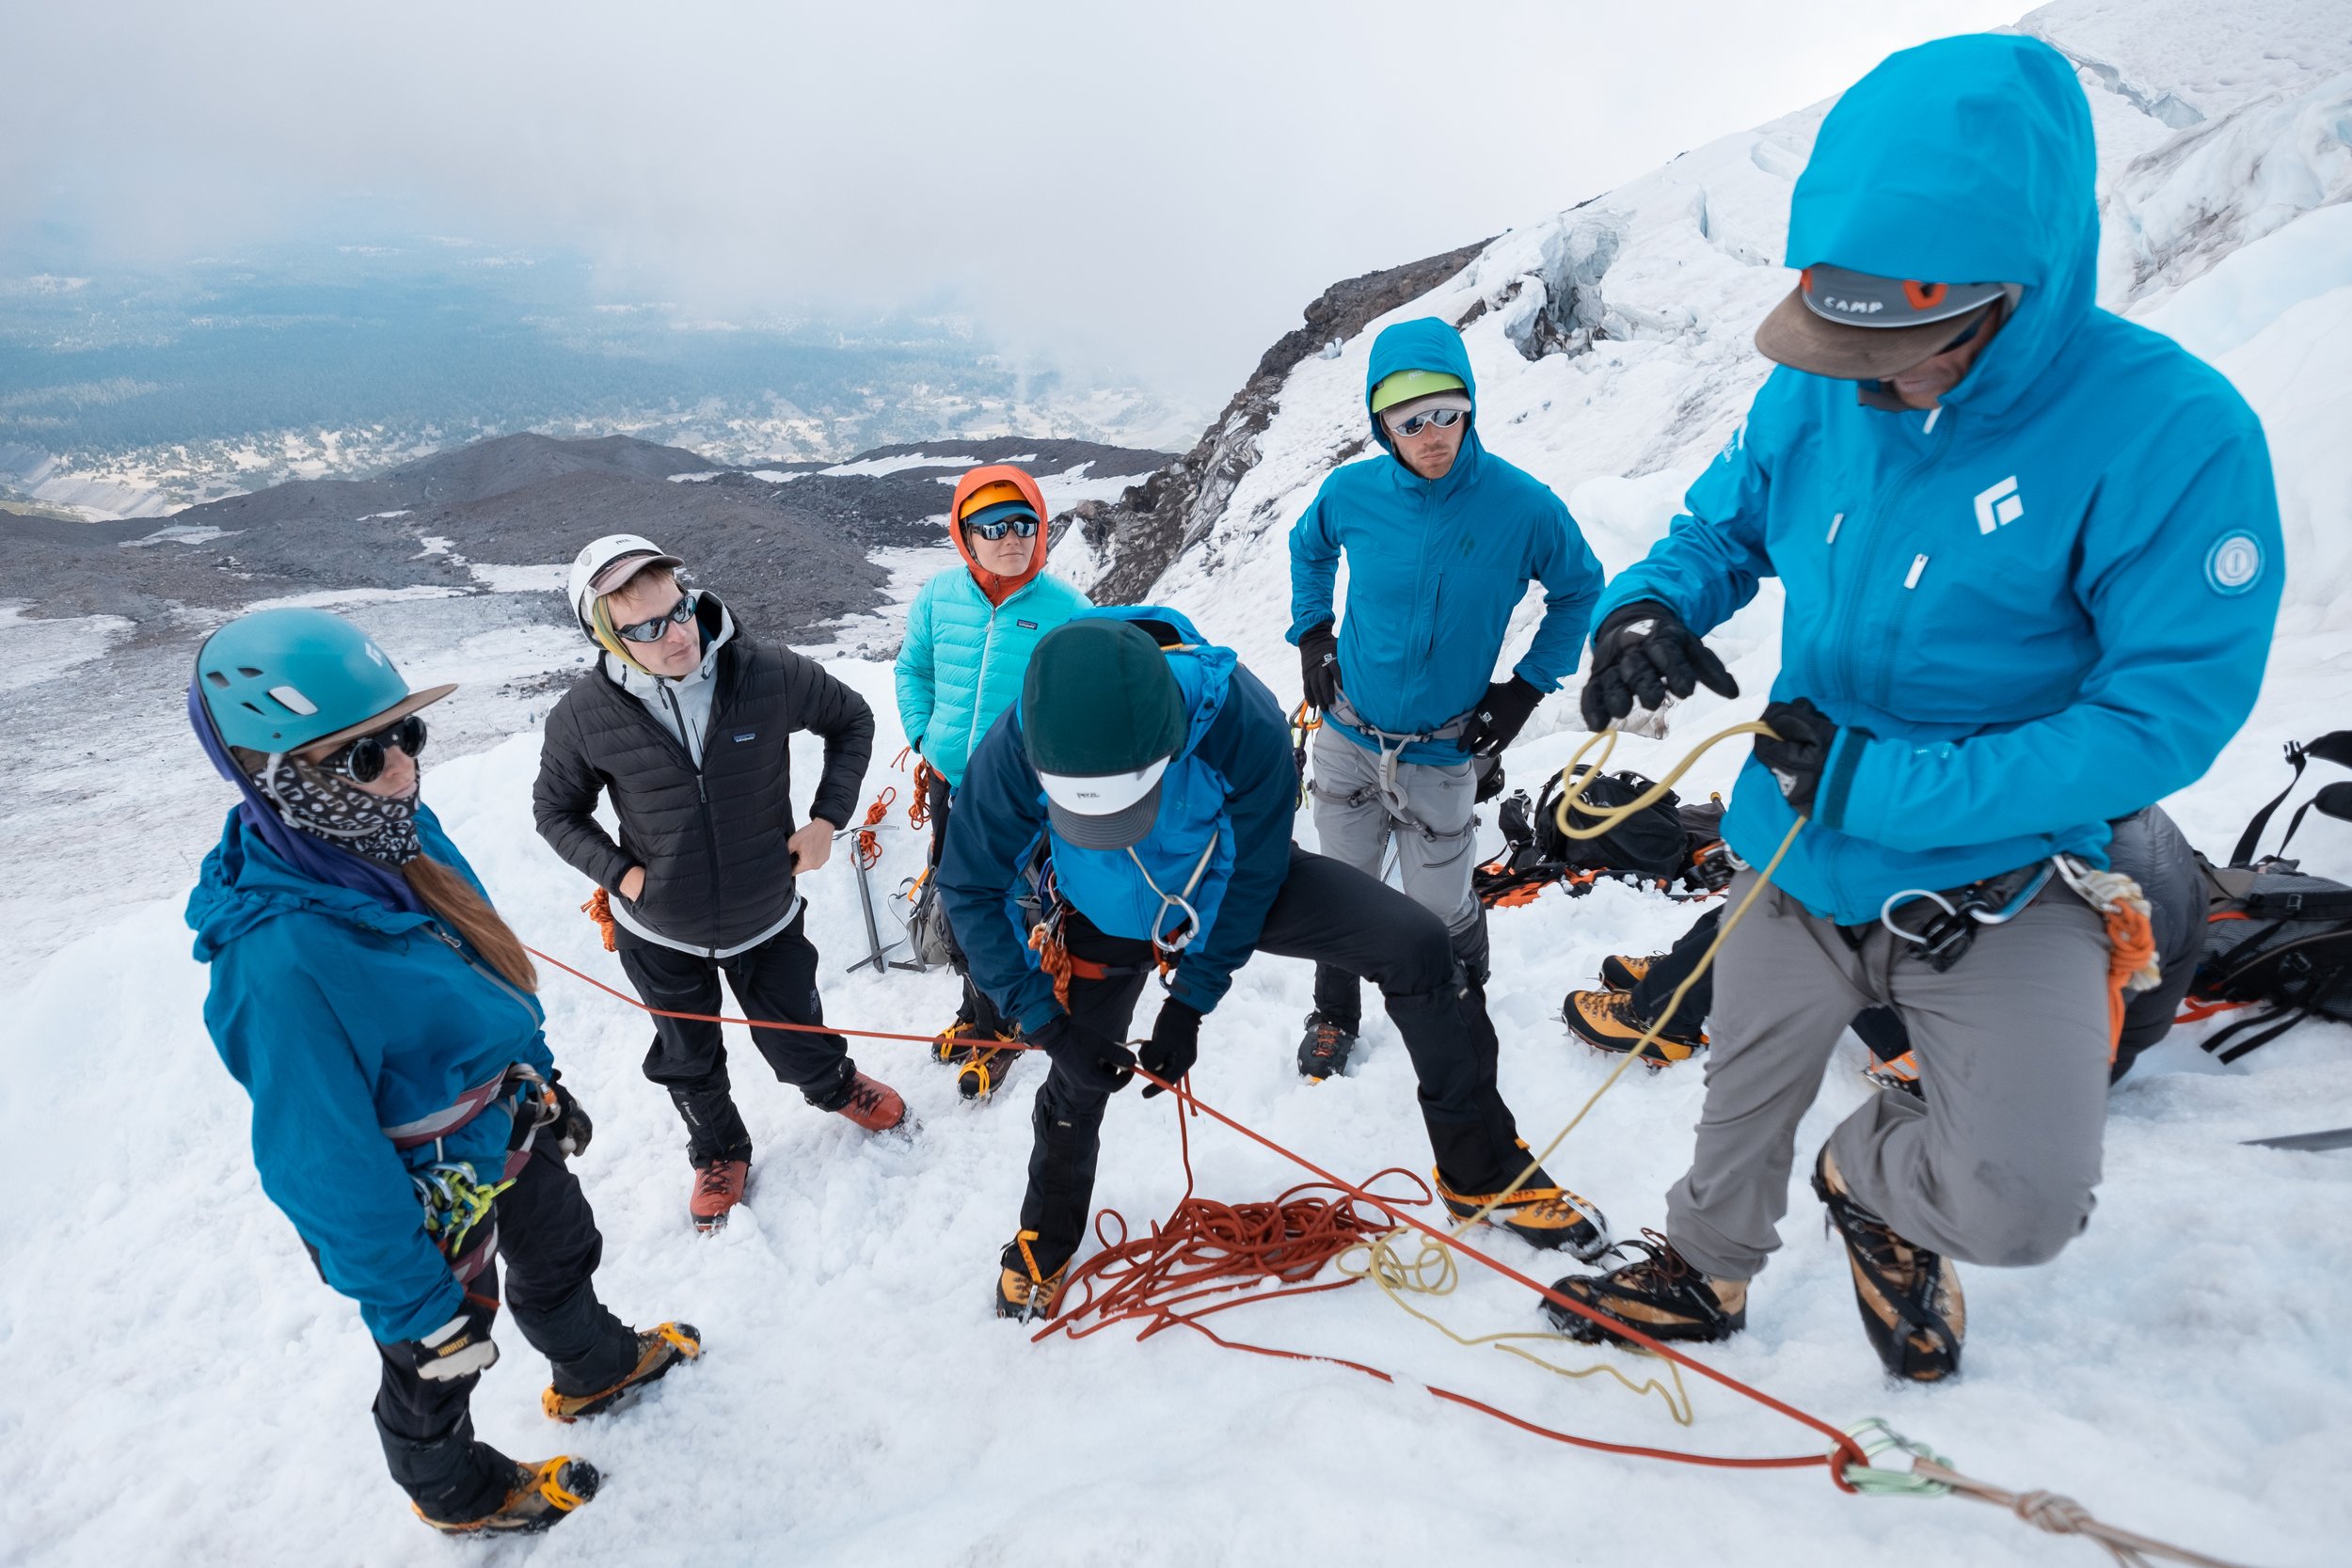 Denali prep mountaineering course participants learn the ins and outs of rope systems